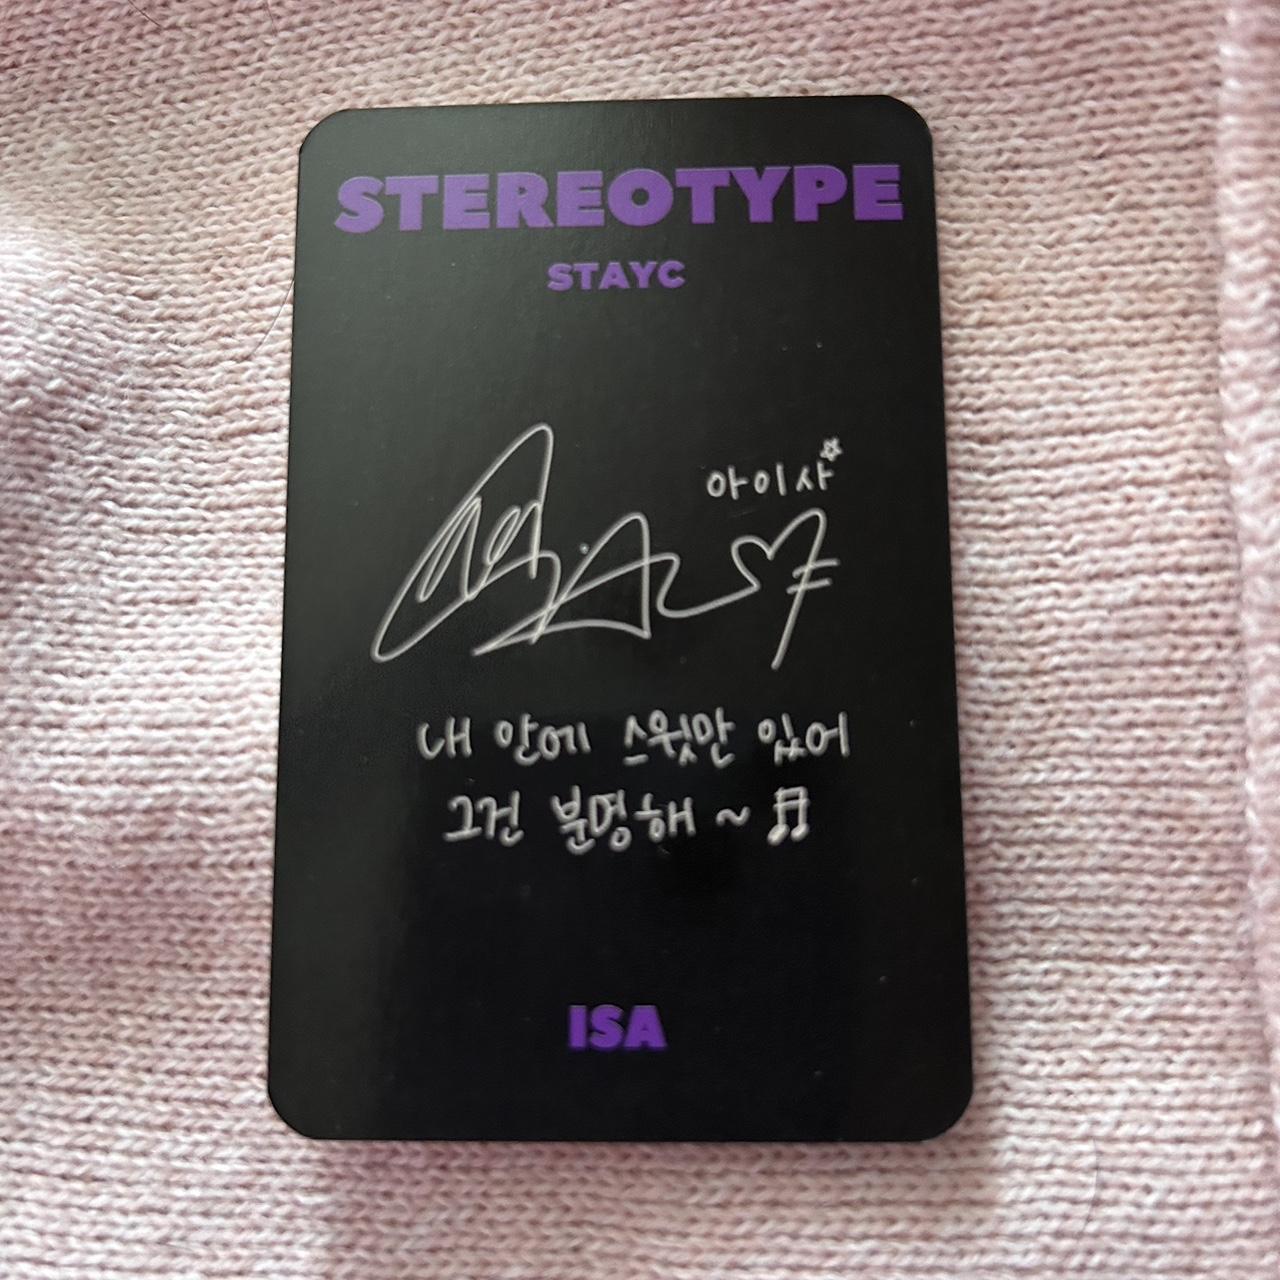 isa STAYC stereotype photocard !! 🌟perfect... - Depop